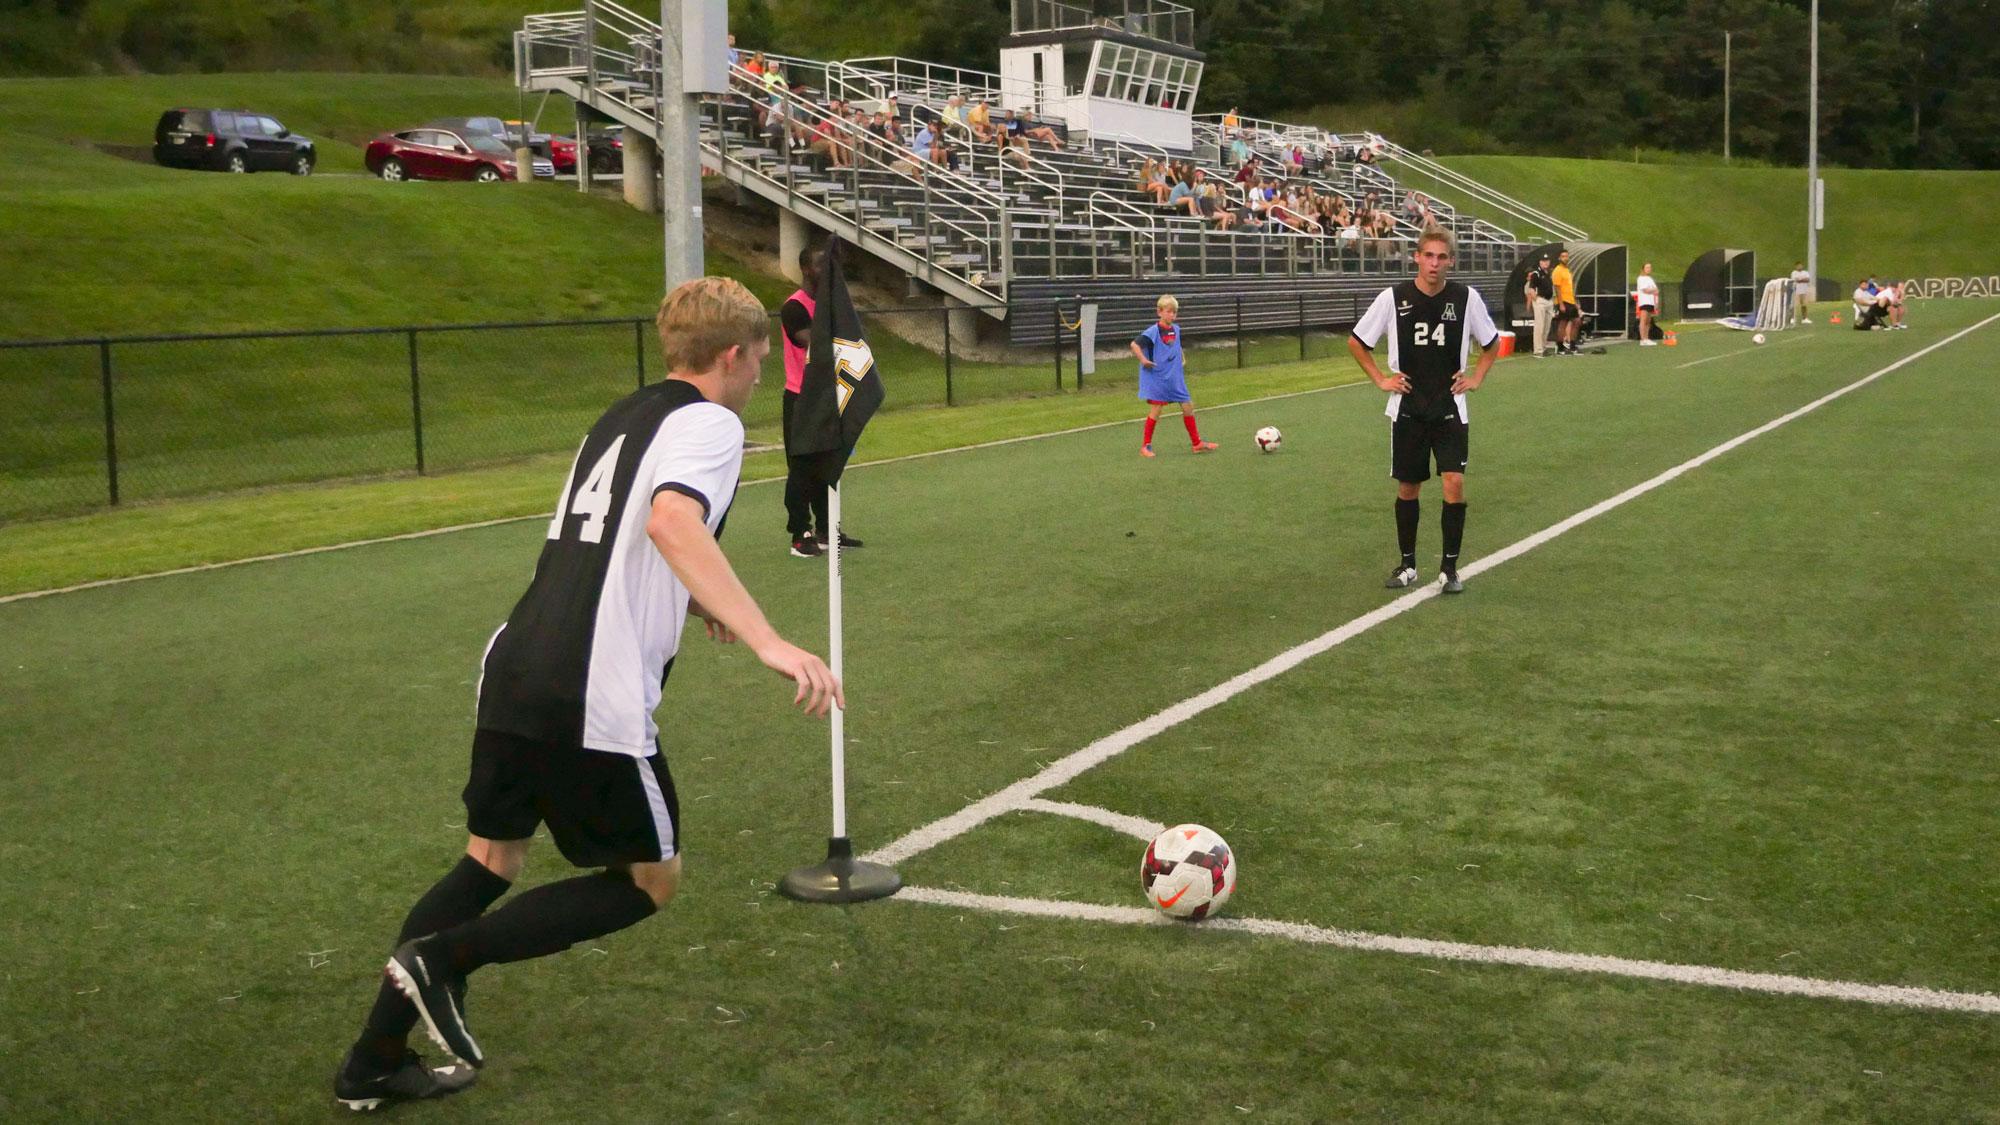 Freshman Reed Honnicutt doing a corner kick during the exhibition game on Wednesday, August 16th.